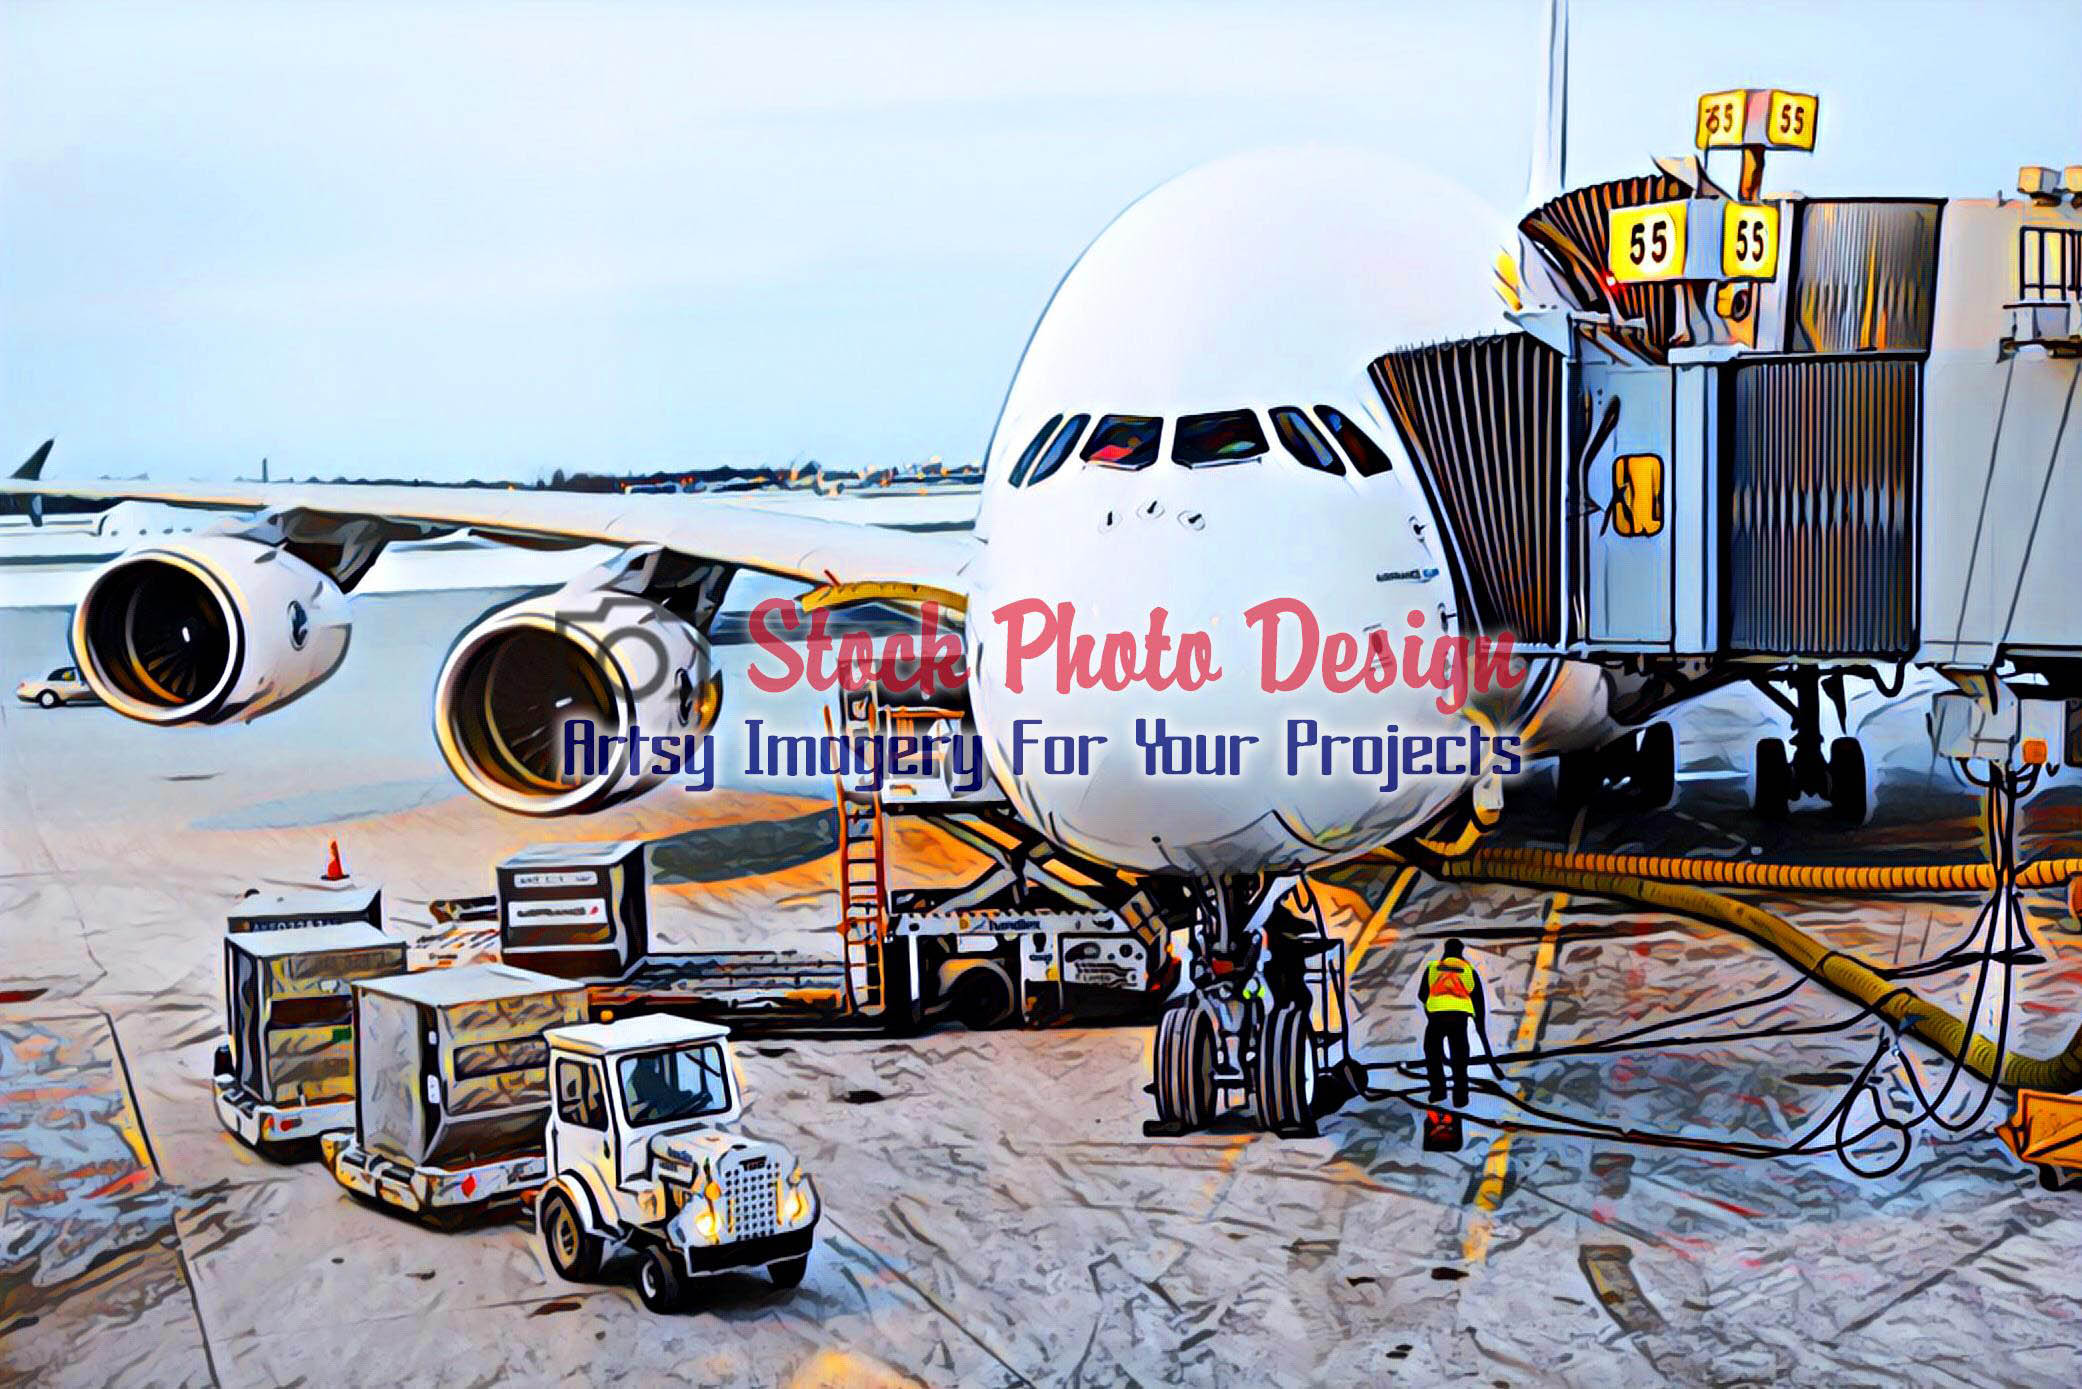 Large Airplane at the Airport - Dimensions: 2082 by 1389 pixels